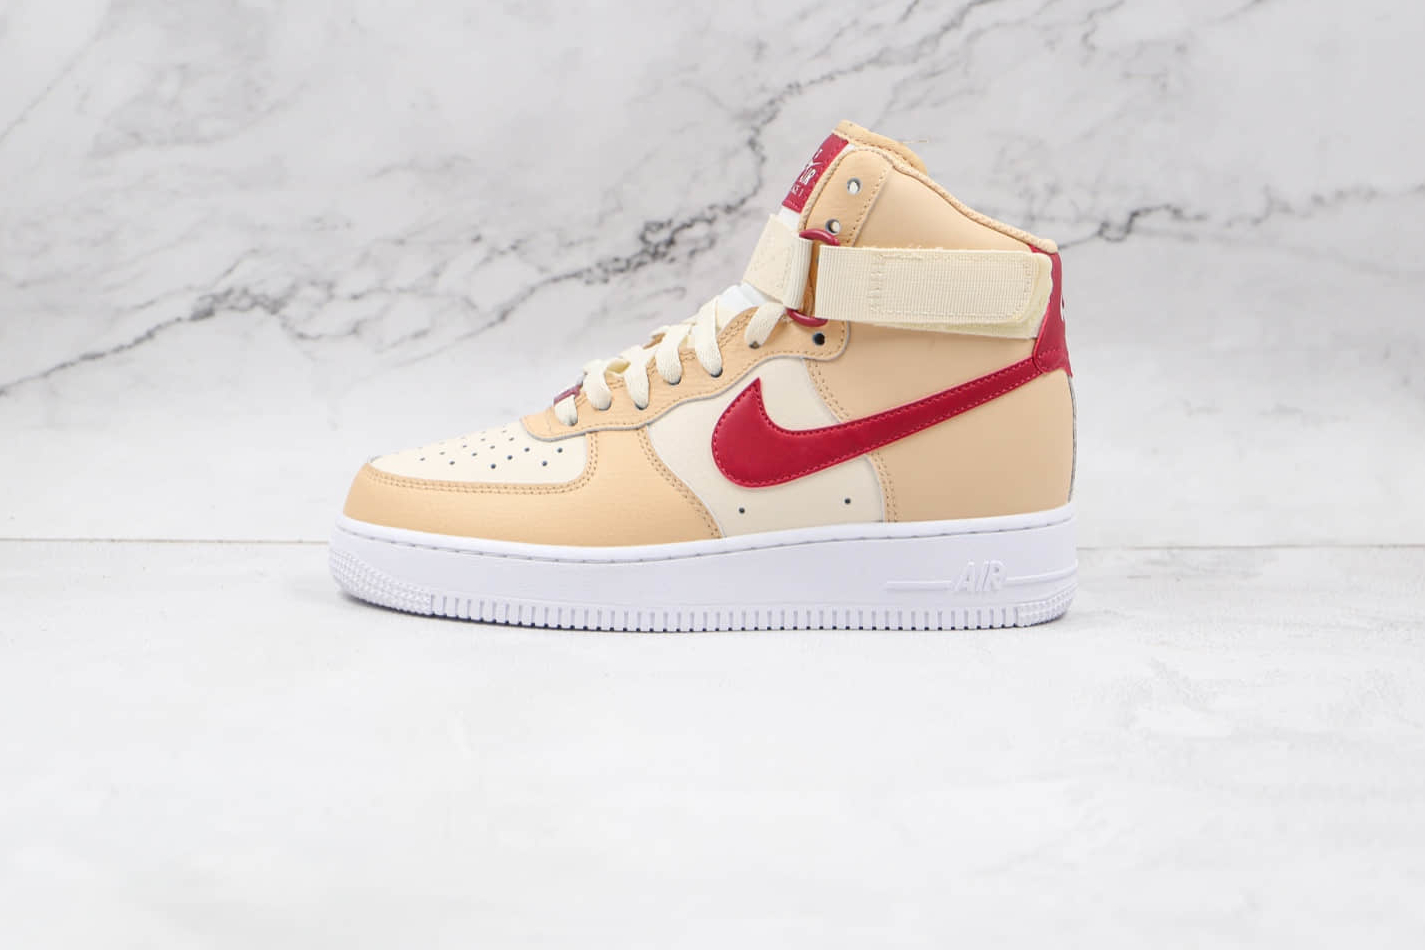 Nike Air Force 1 High 'Mars Yard' 334031-200 - Iconic Design with Unmatched Style